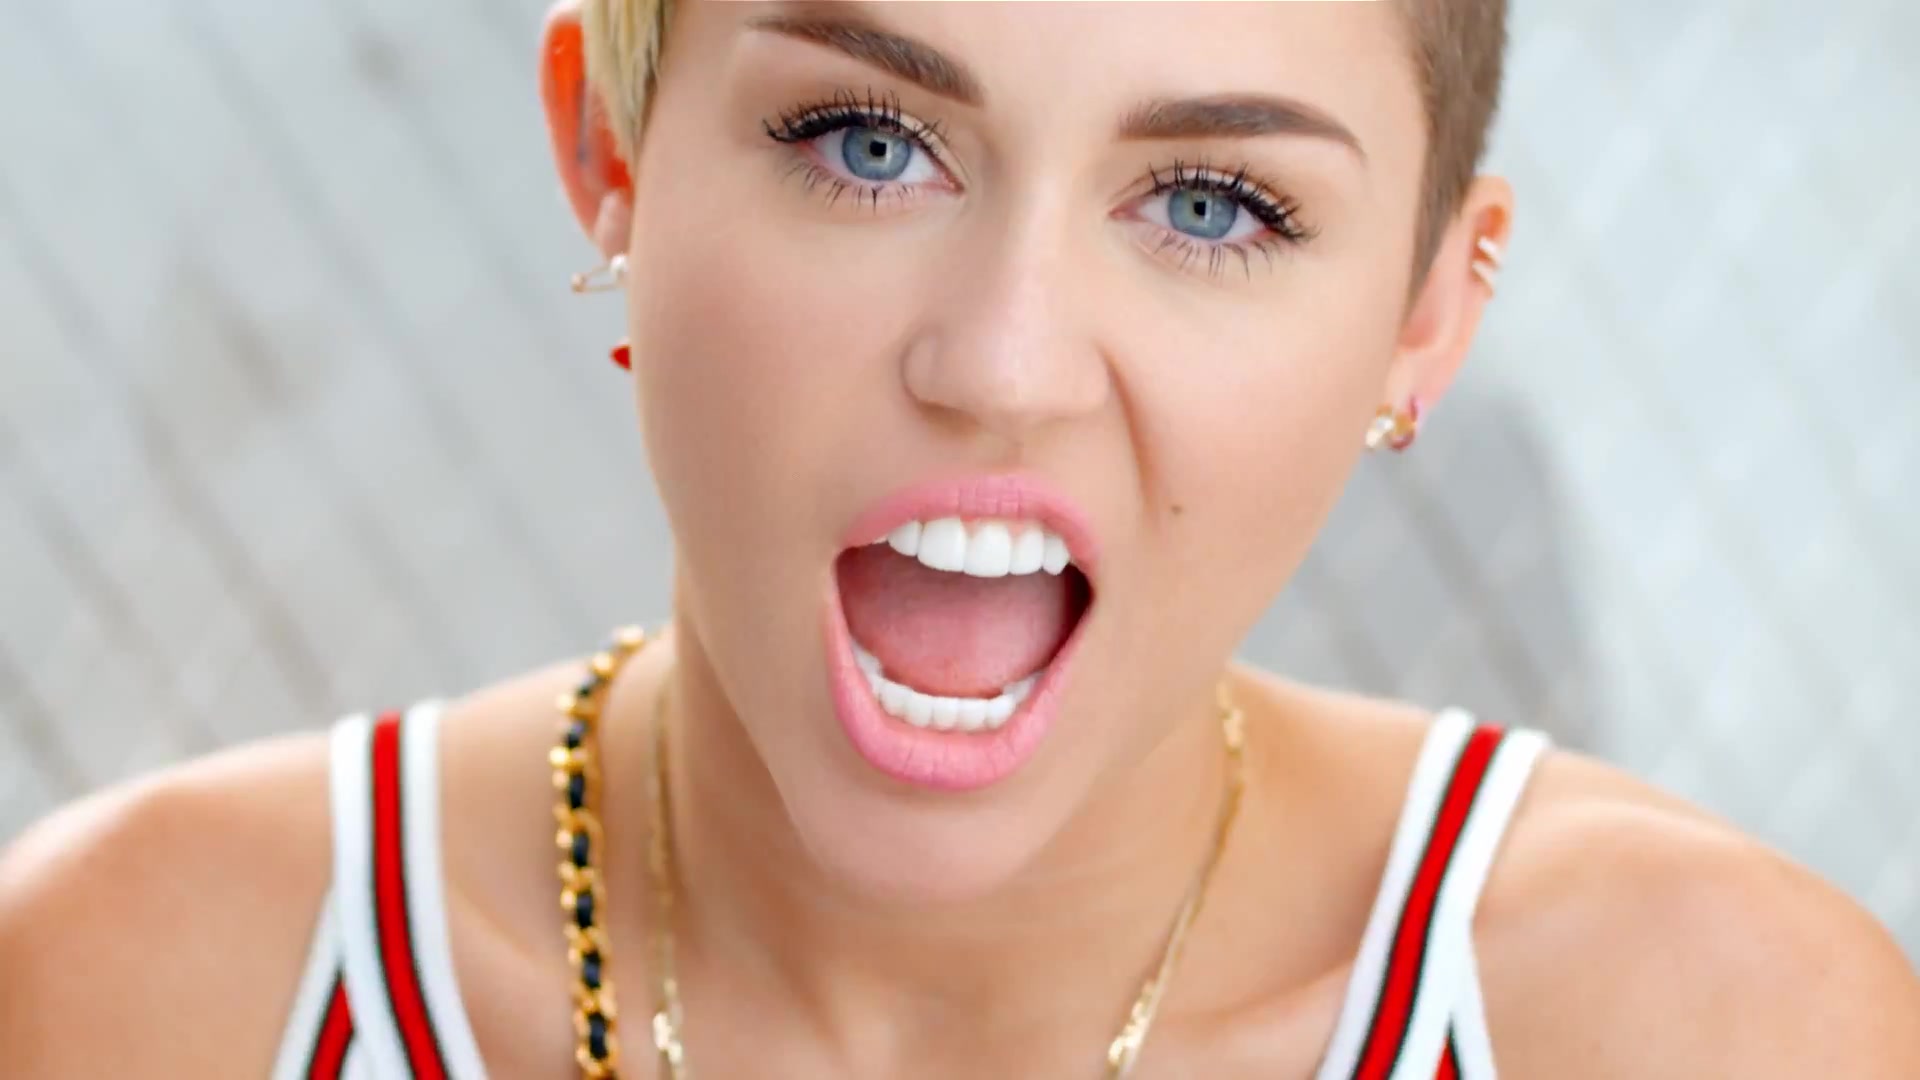 miley-cyrus-wallpapers